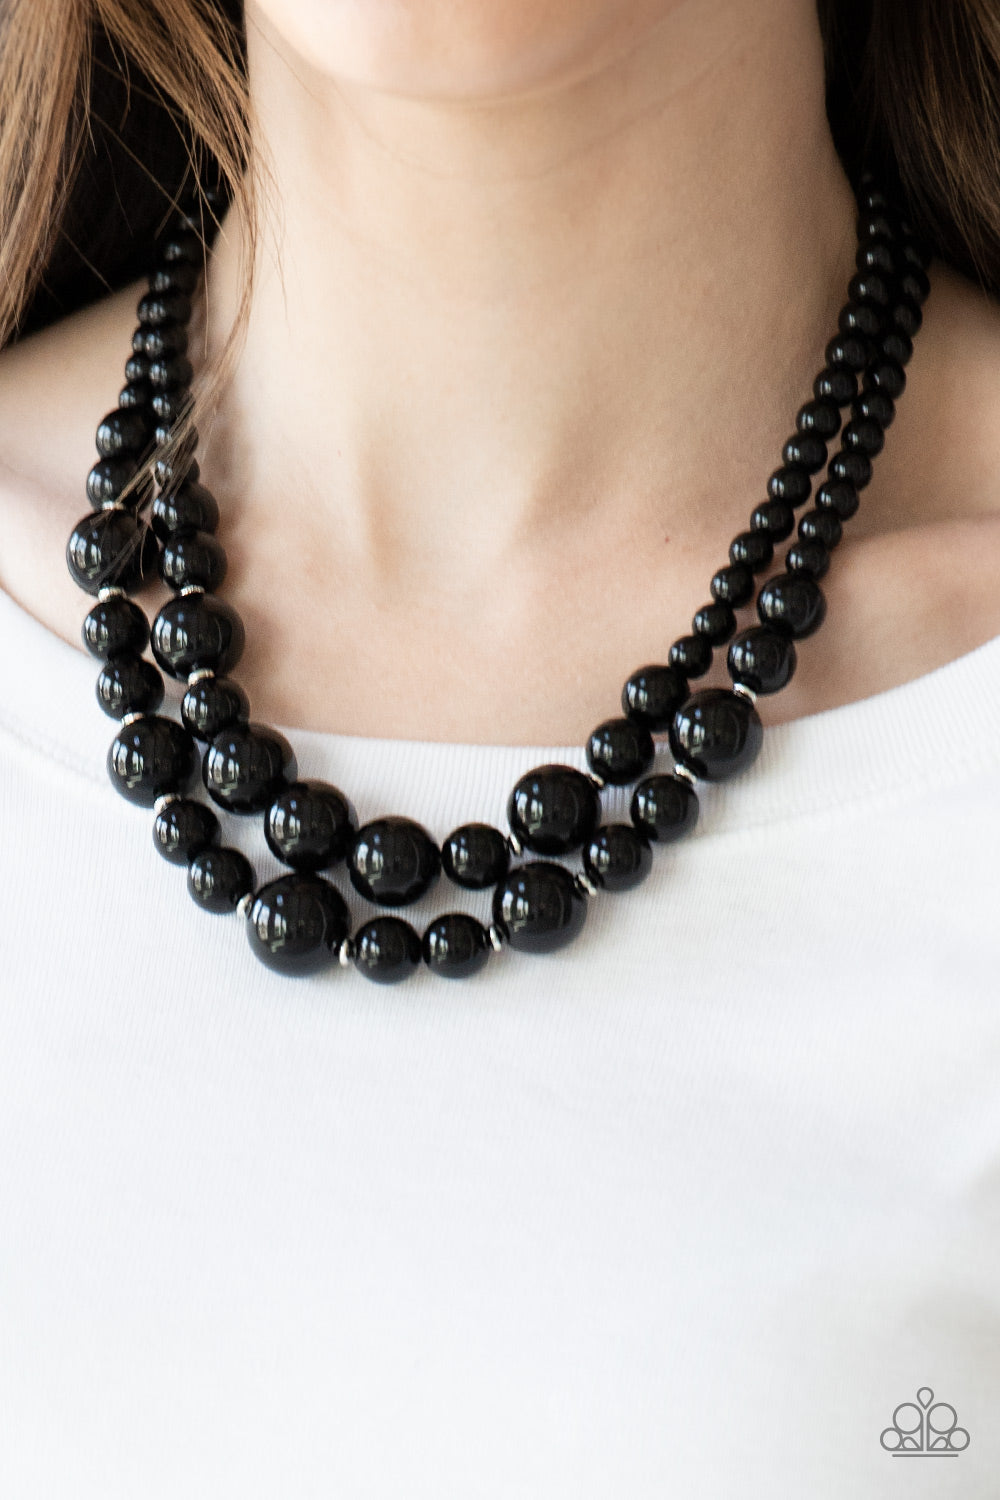 The More The Modest - Black Necklace - Paparazzi Accessories